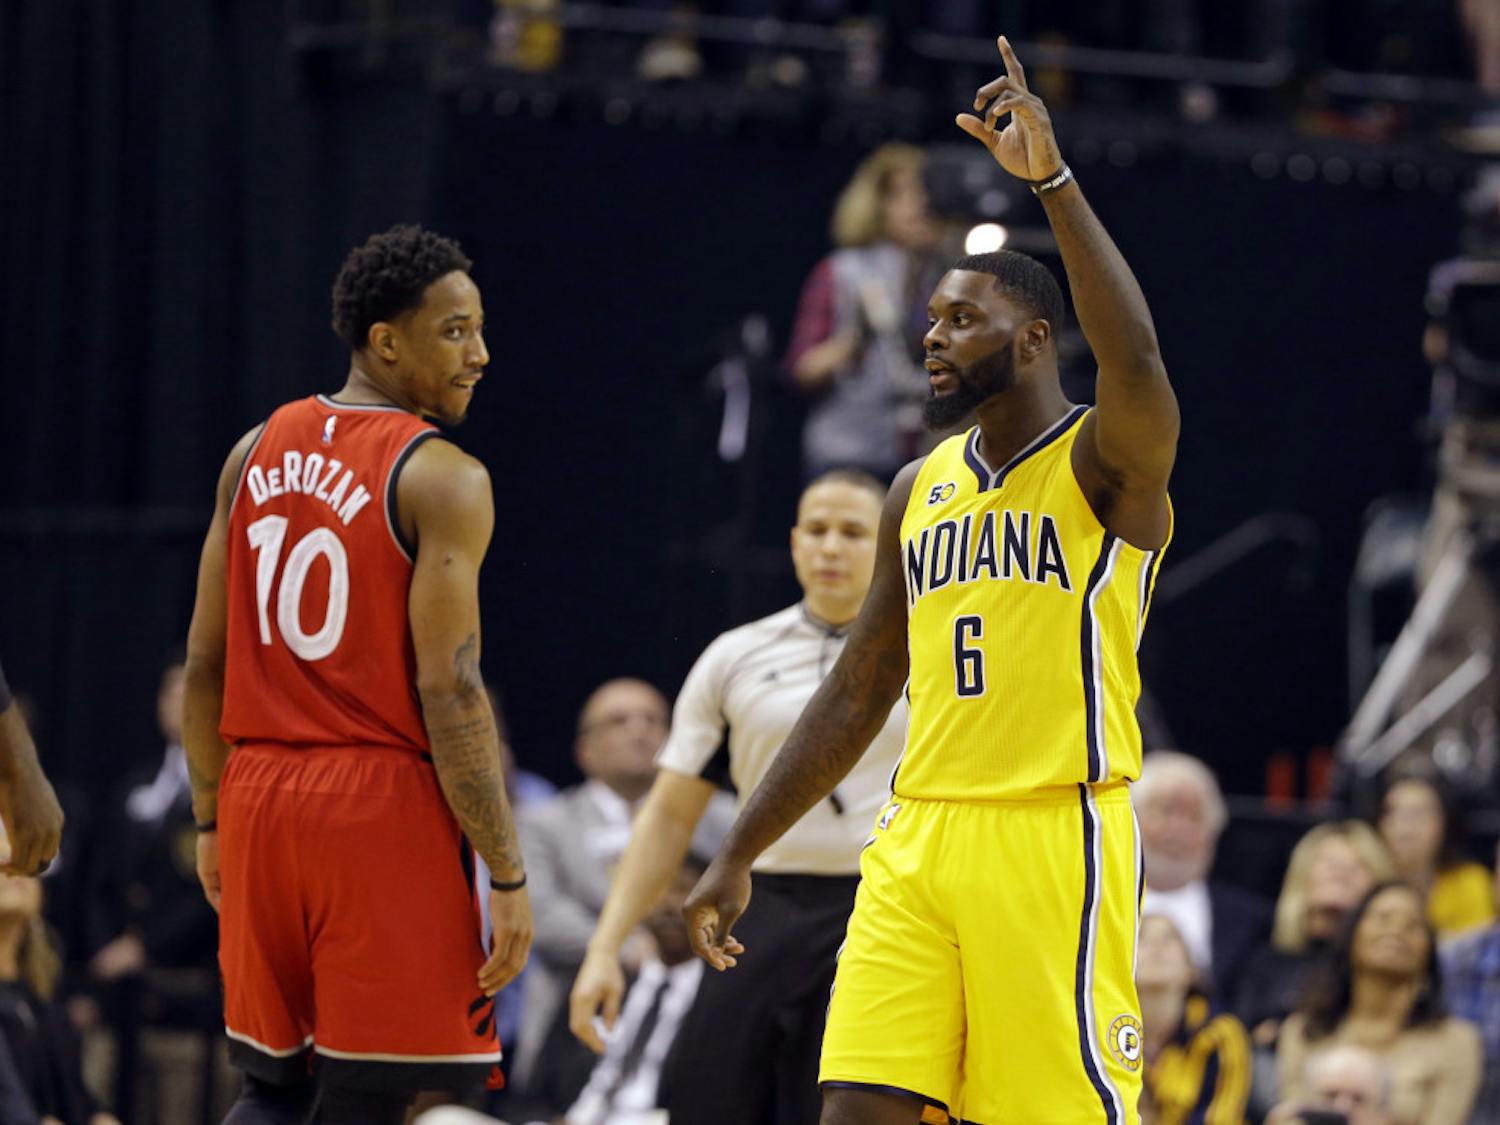 Indiana Pacers forward Paul George (13) celebrates as Toronto Raptors guard DeMar DeRozan (10) watches during the second half of an NBA basketball game in Indianapolis, Tuesday, April 4, 2017. The Pacers defeated the Raptors 108-90. (AP Photo/Michael Conroy)